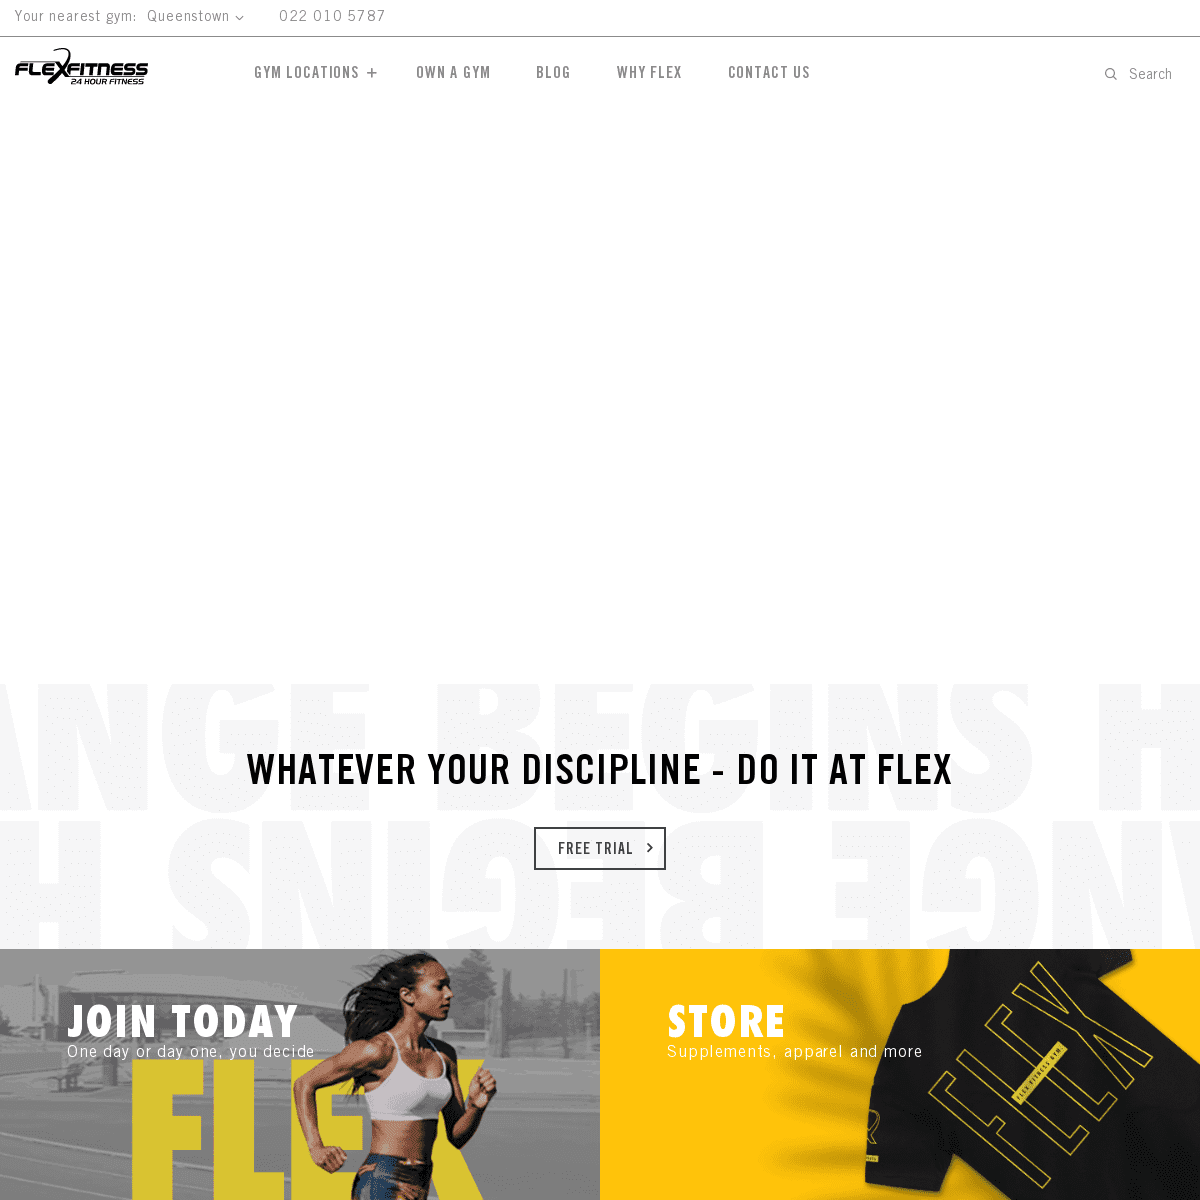 A complete backup of flexfitnessgym.co.nz